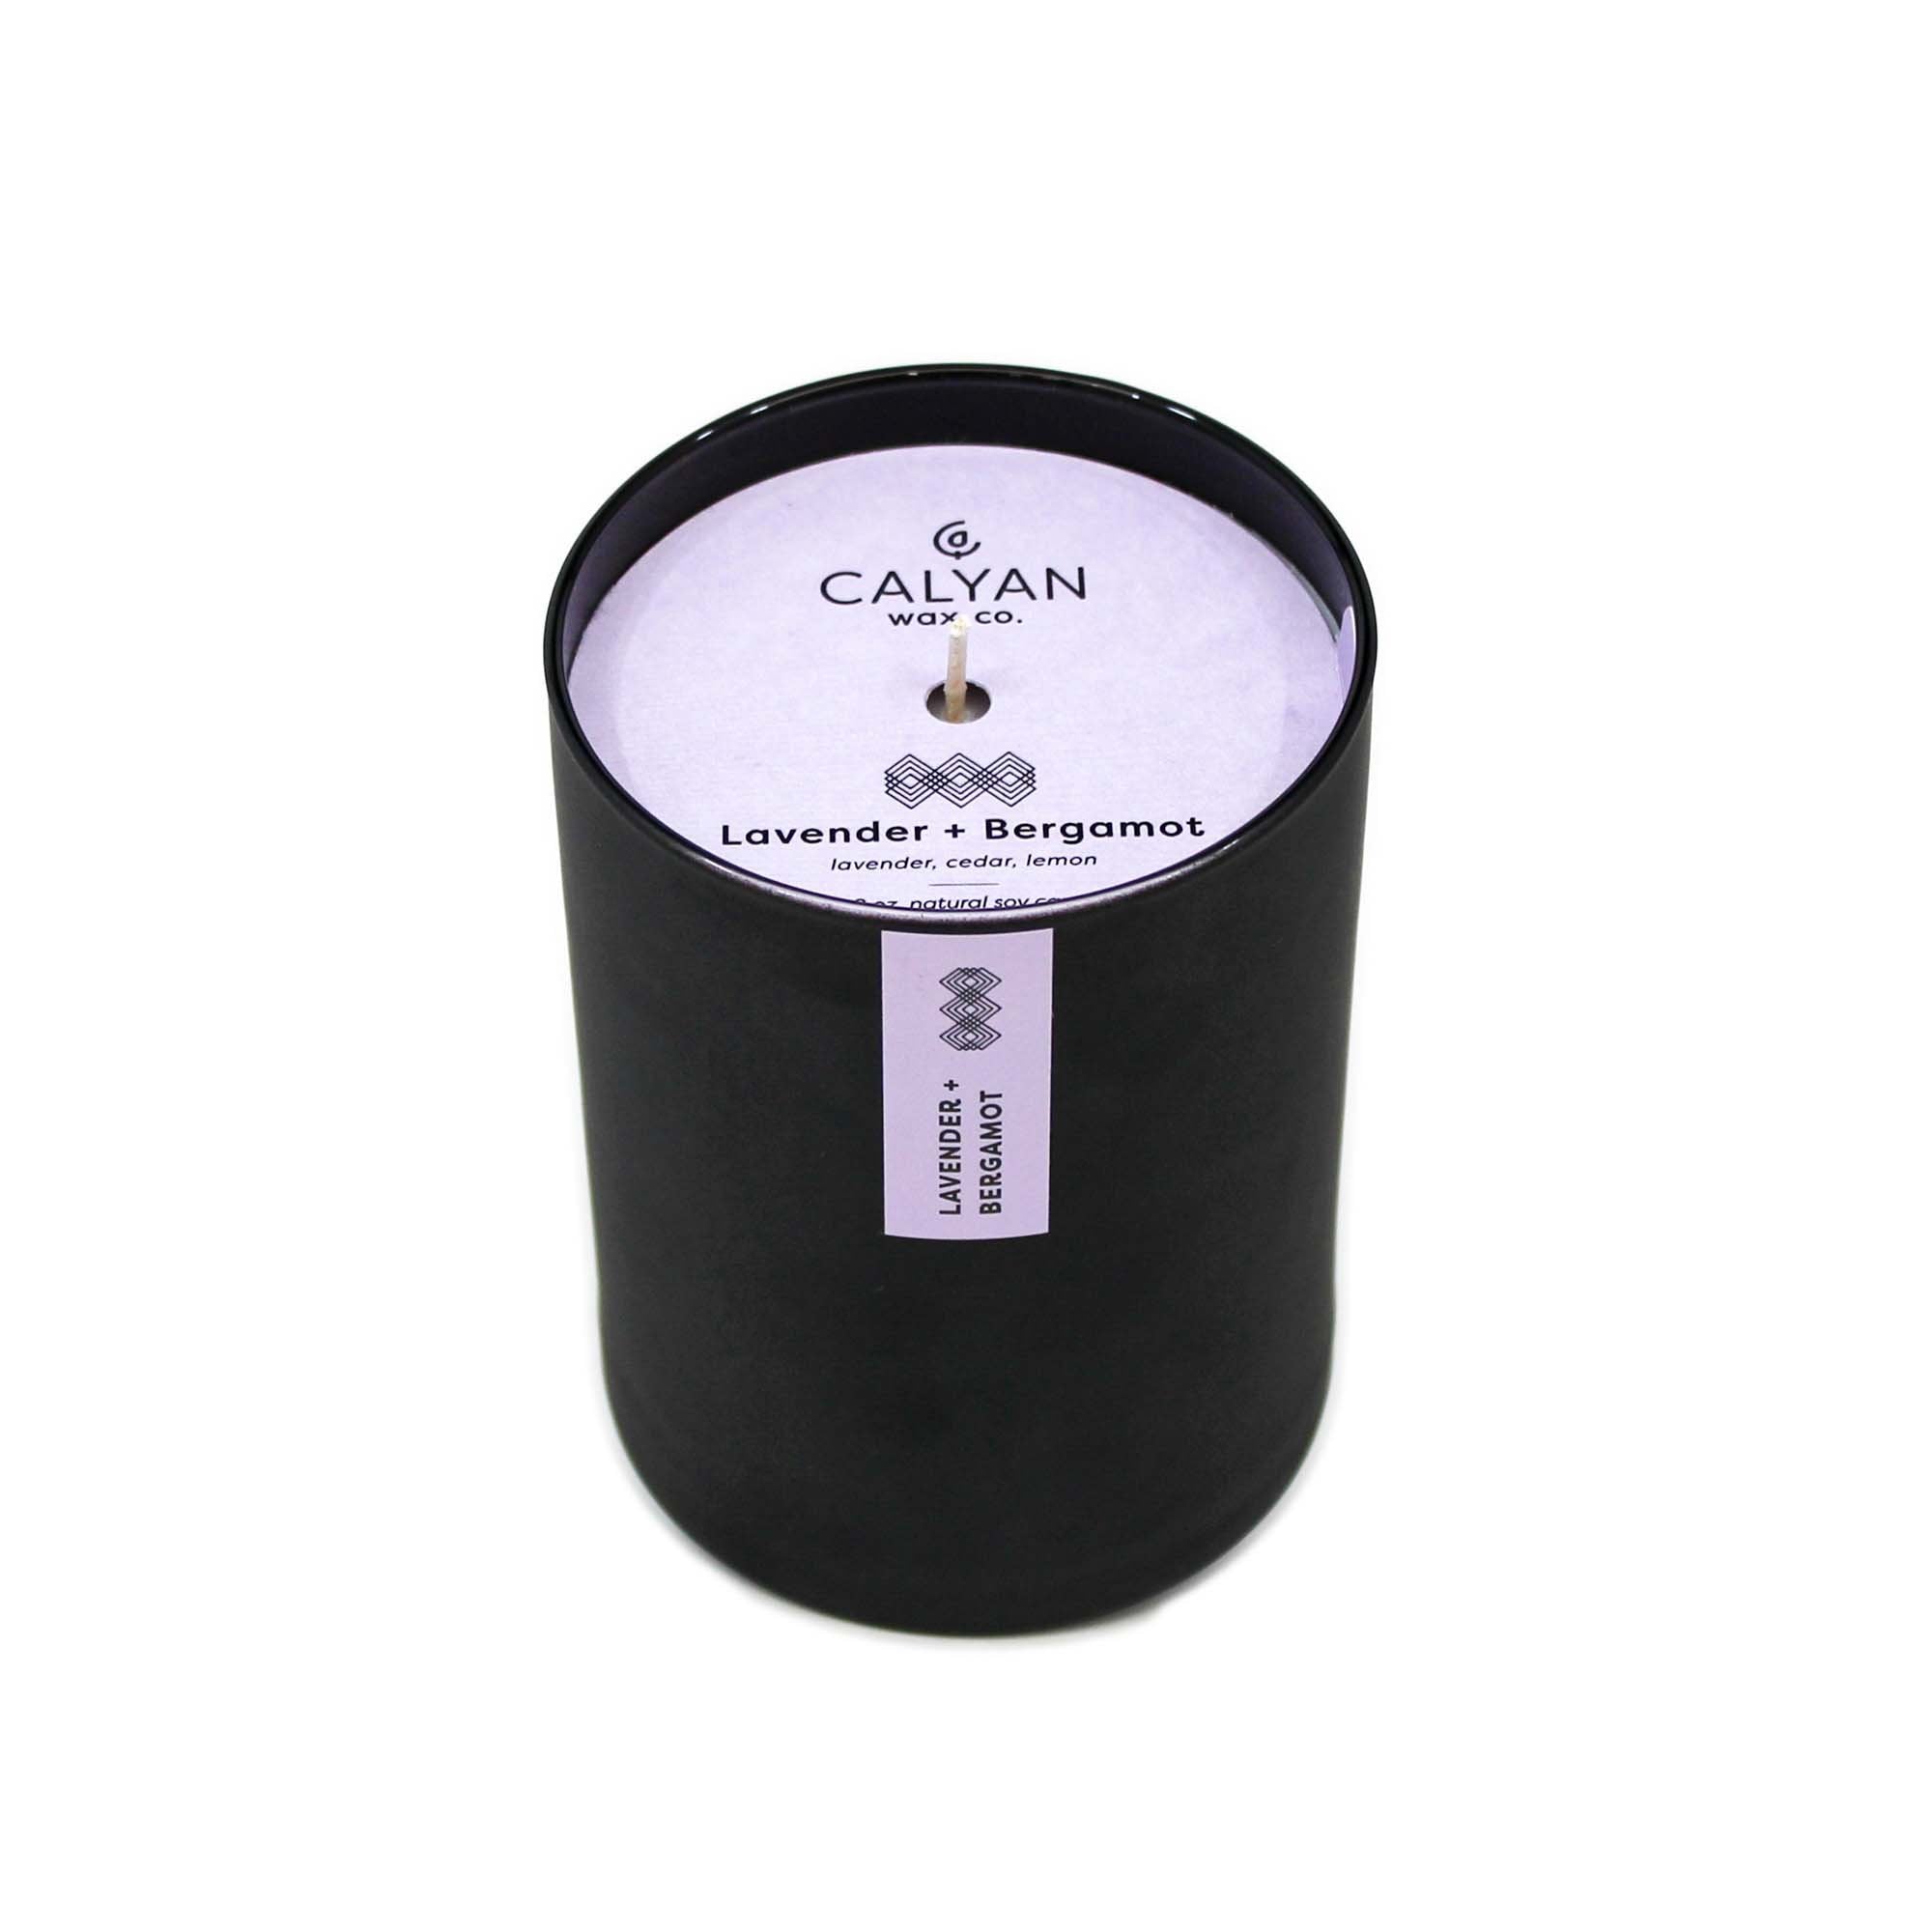 Collection of black matte glass tumbler candles from Calyan Wax Co.